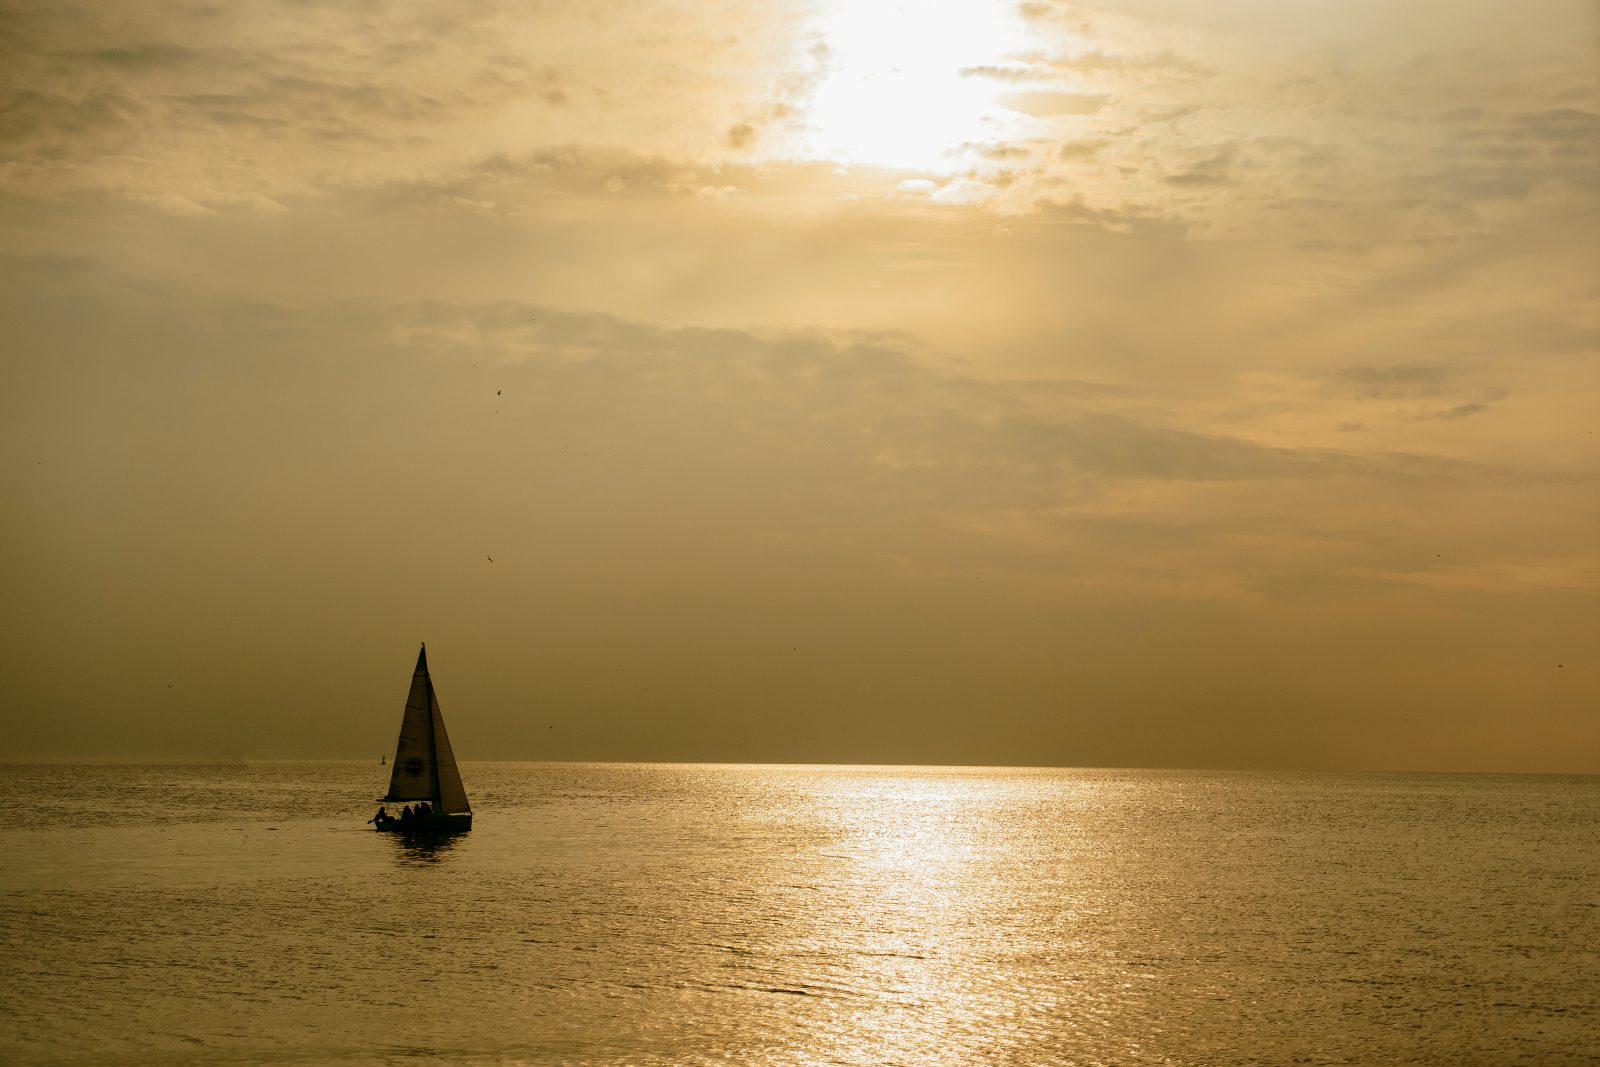 Sunset in the sea, a small sailing boat at sunset away